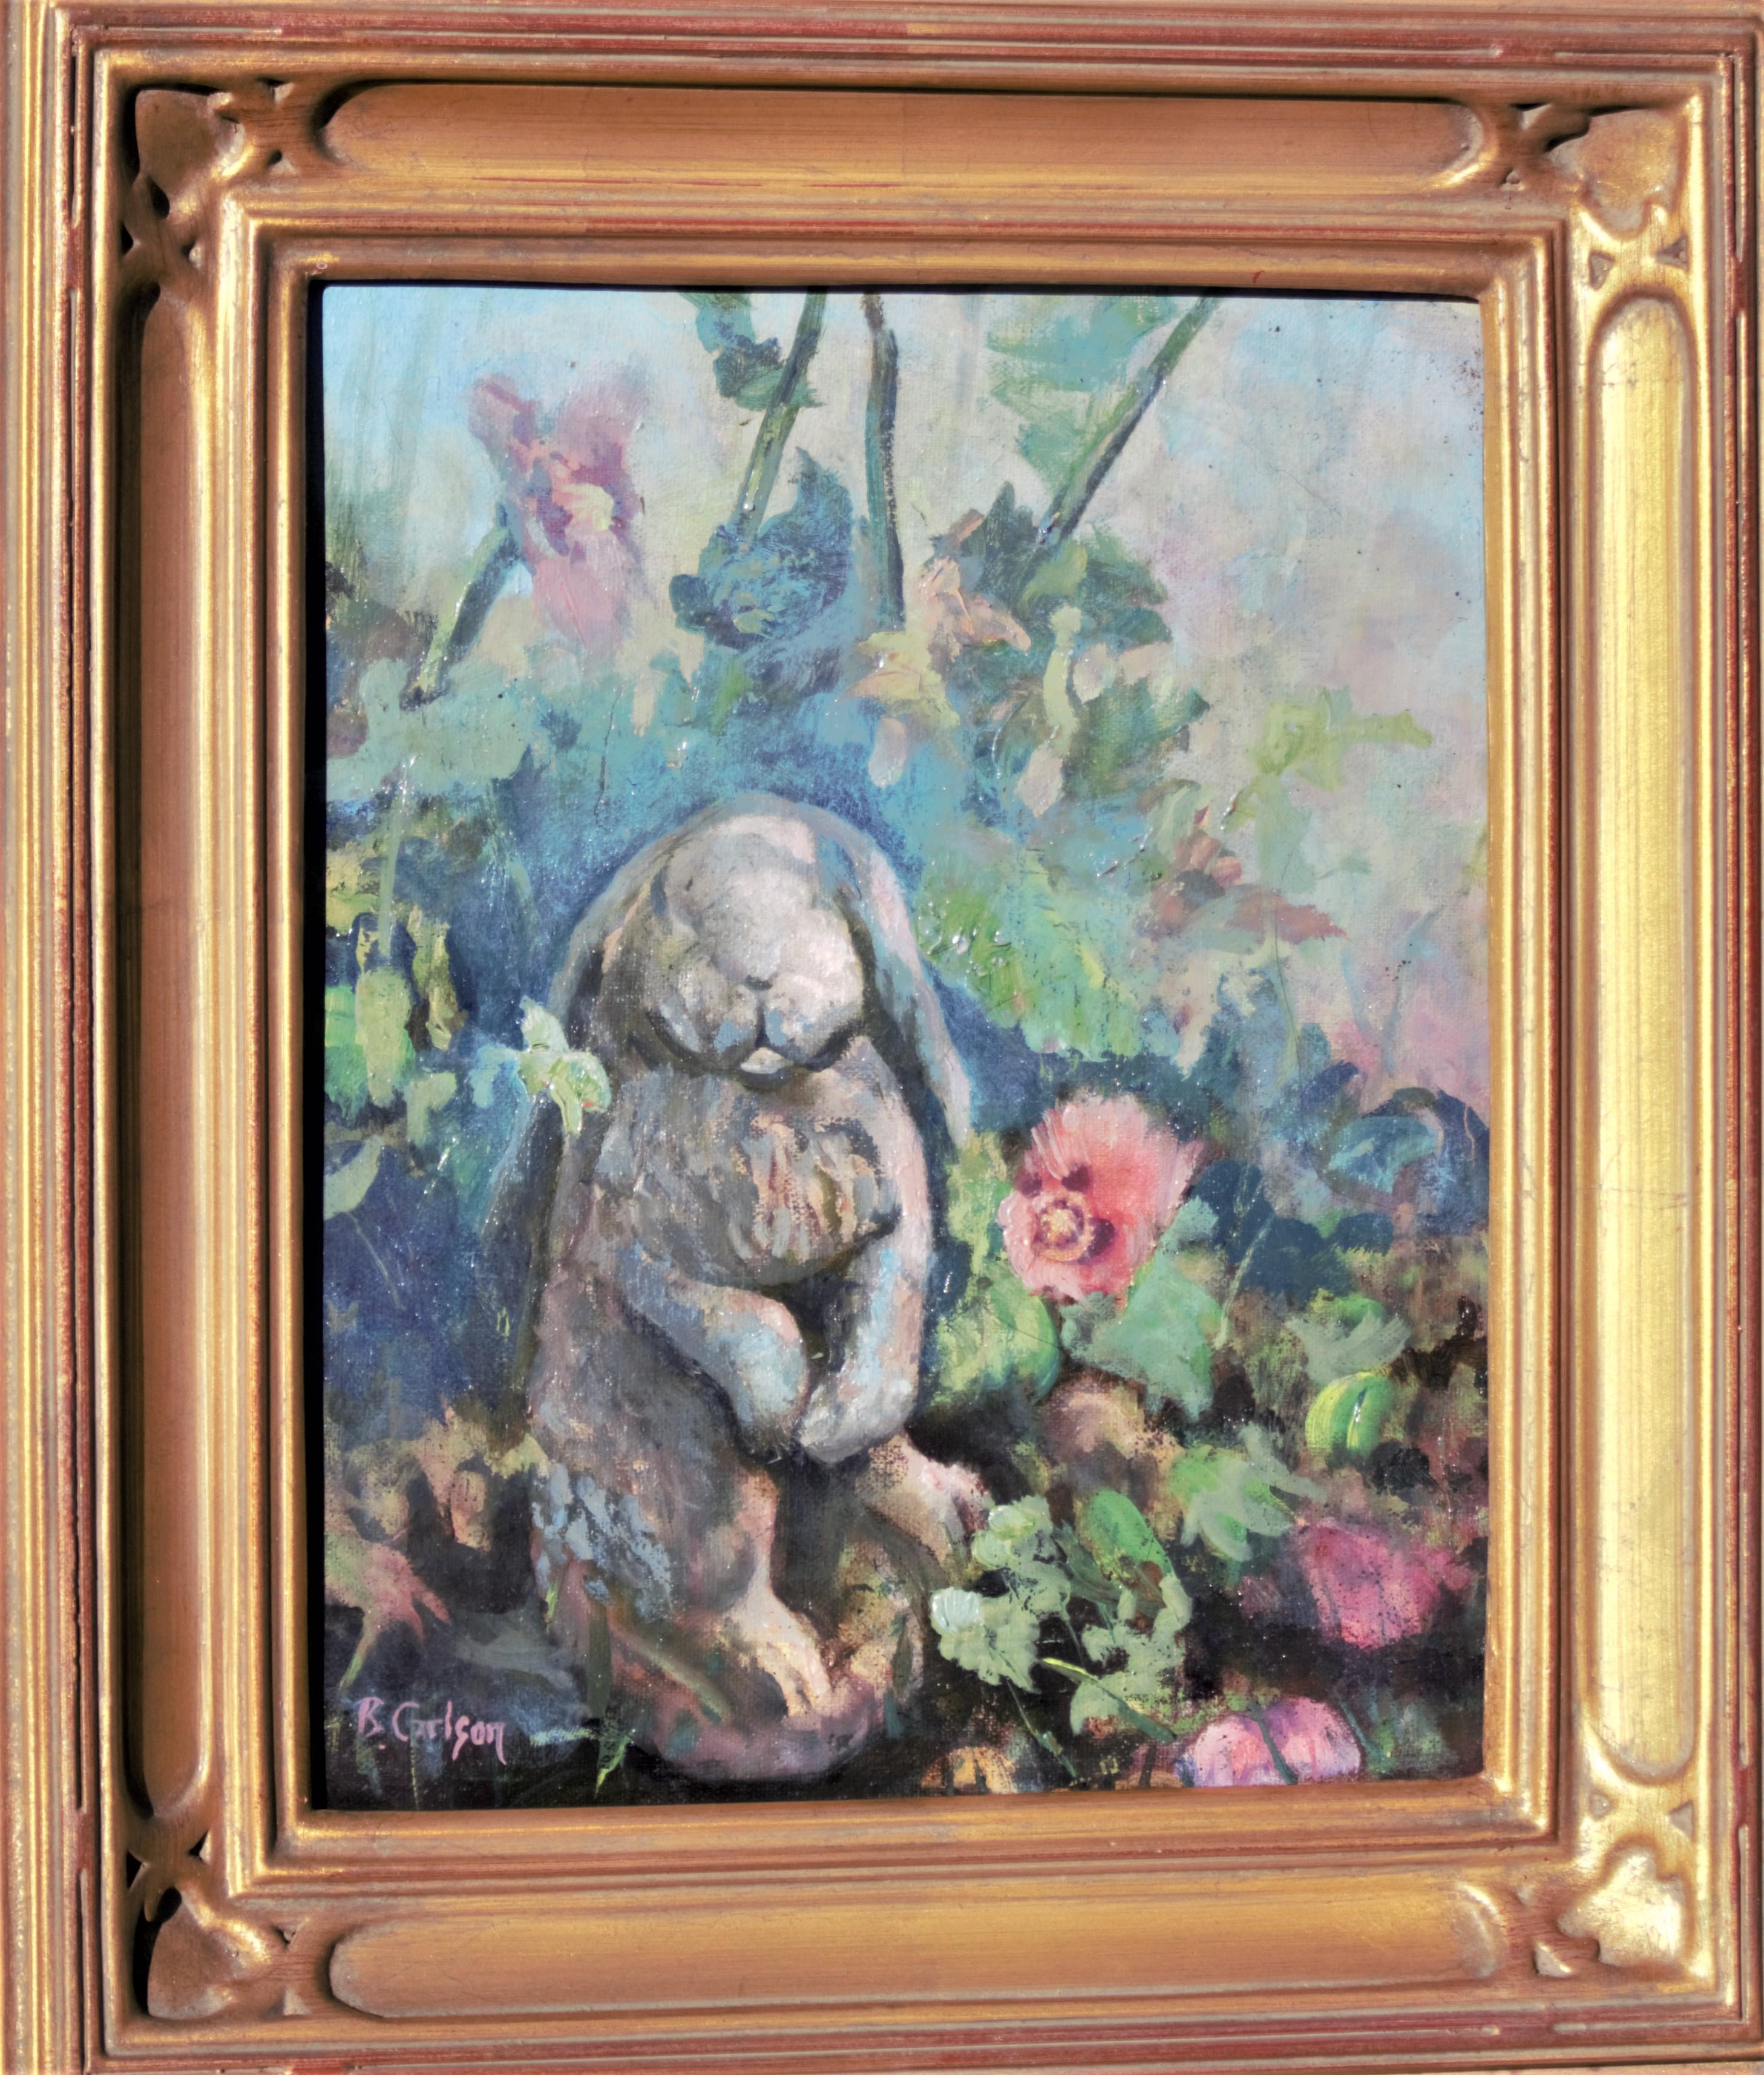 Whimsical Charming Painting of A Garden with a Bunny Statue Amid Summer Poppies For Sale 3